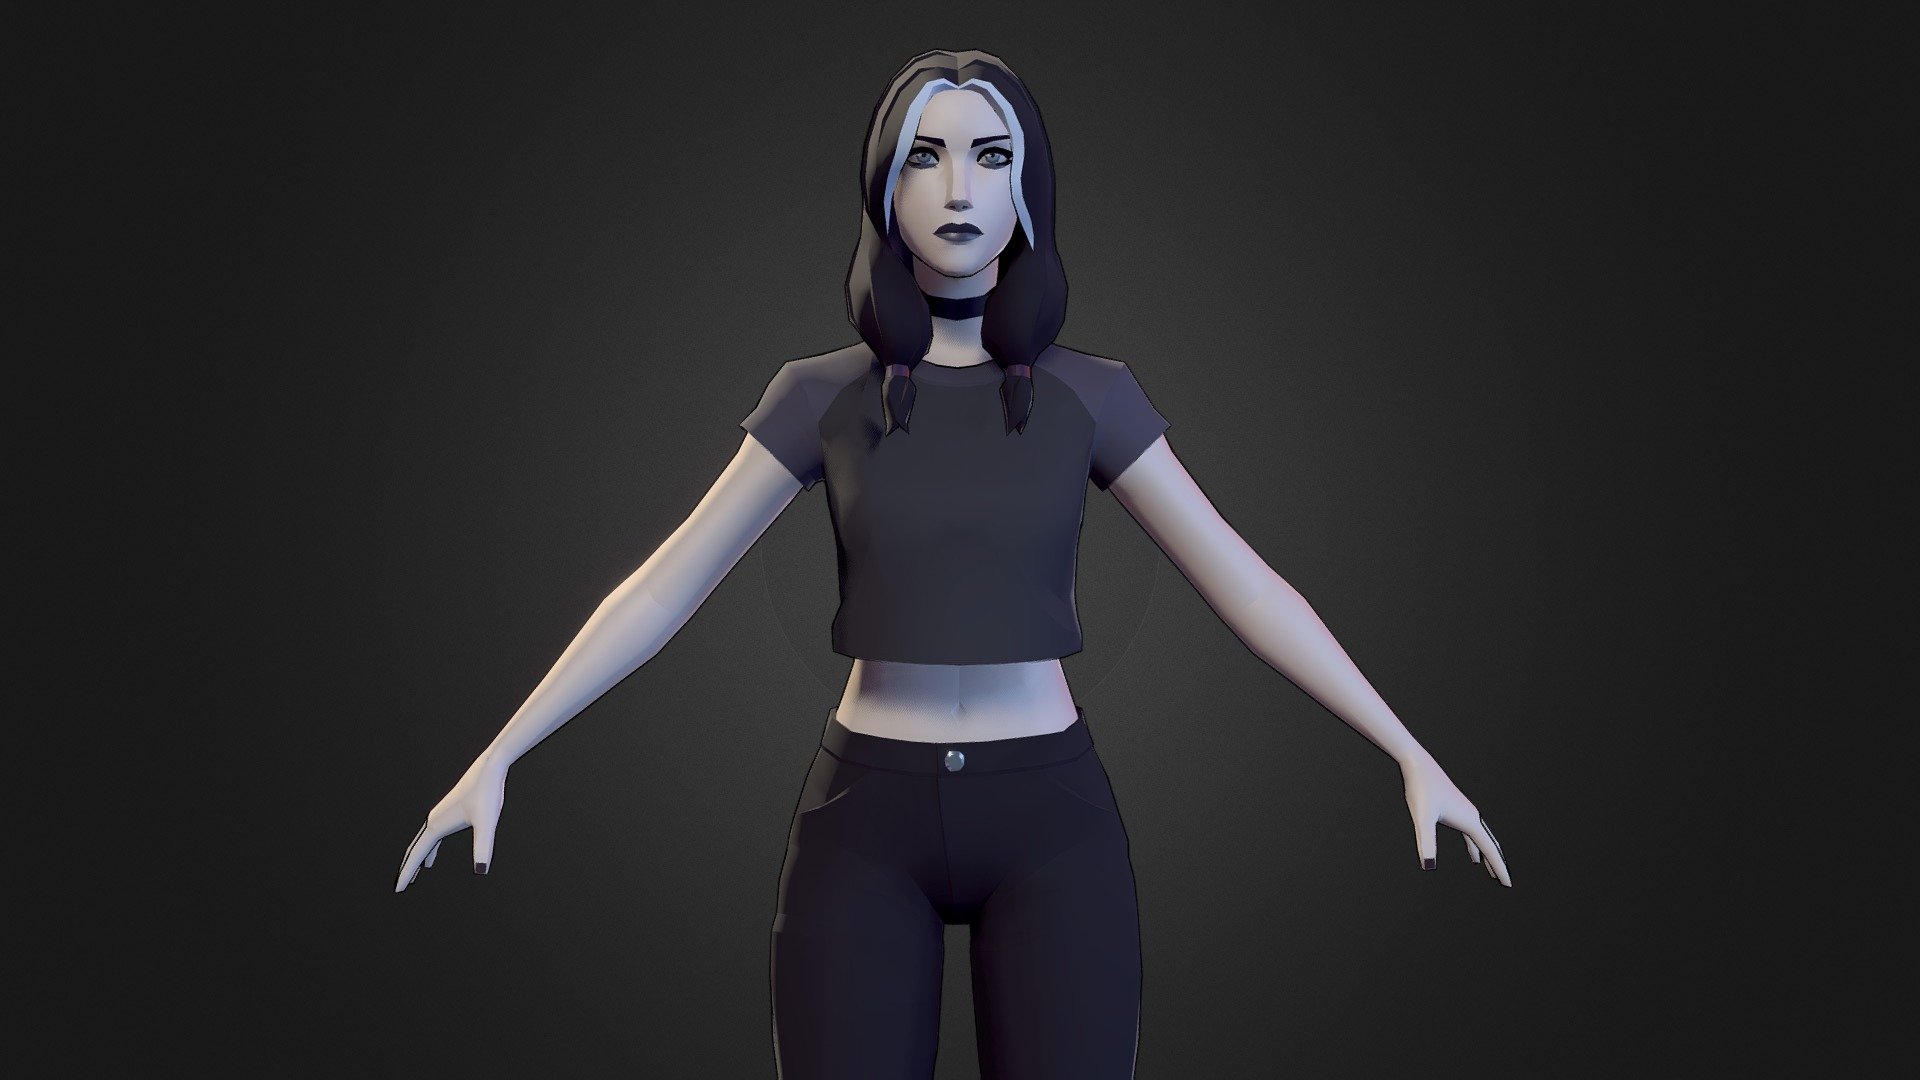 Gameready lowpoly character with customizable outfit, optimized materials, and basic blendshapes for facial expressions

*** Includes character customization demo (Unity3D)**

Features:




Humanoid rig compatible with Unity Engine's Mecanim

Modular parts

Uses a single material with a lightweight atlas texture

Primary UV uses an atlas texture for optimized performance

Secondary UV is fully unwrapped

Customization options:




5 hairstyles

1 neck accessory

21 shirts and jackets combinations

3 gloves

1 pants/shorts

4 shoes

Videos




Animation tests: https://www.youtube.com/watch?v=4q_jPVK0PO8

Customization sample: https://www.youtube.com/watch?v=5NkvTmiI-jc



 - Milena - Lowpoly Customizable Character - Buy Royalty Free 3D model by Rukha93 3d model